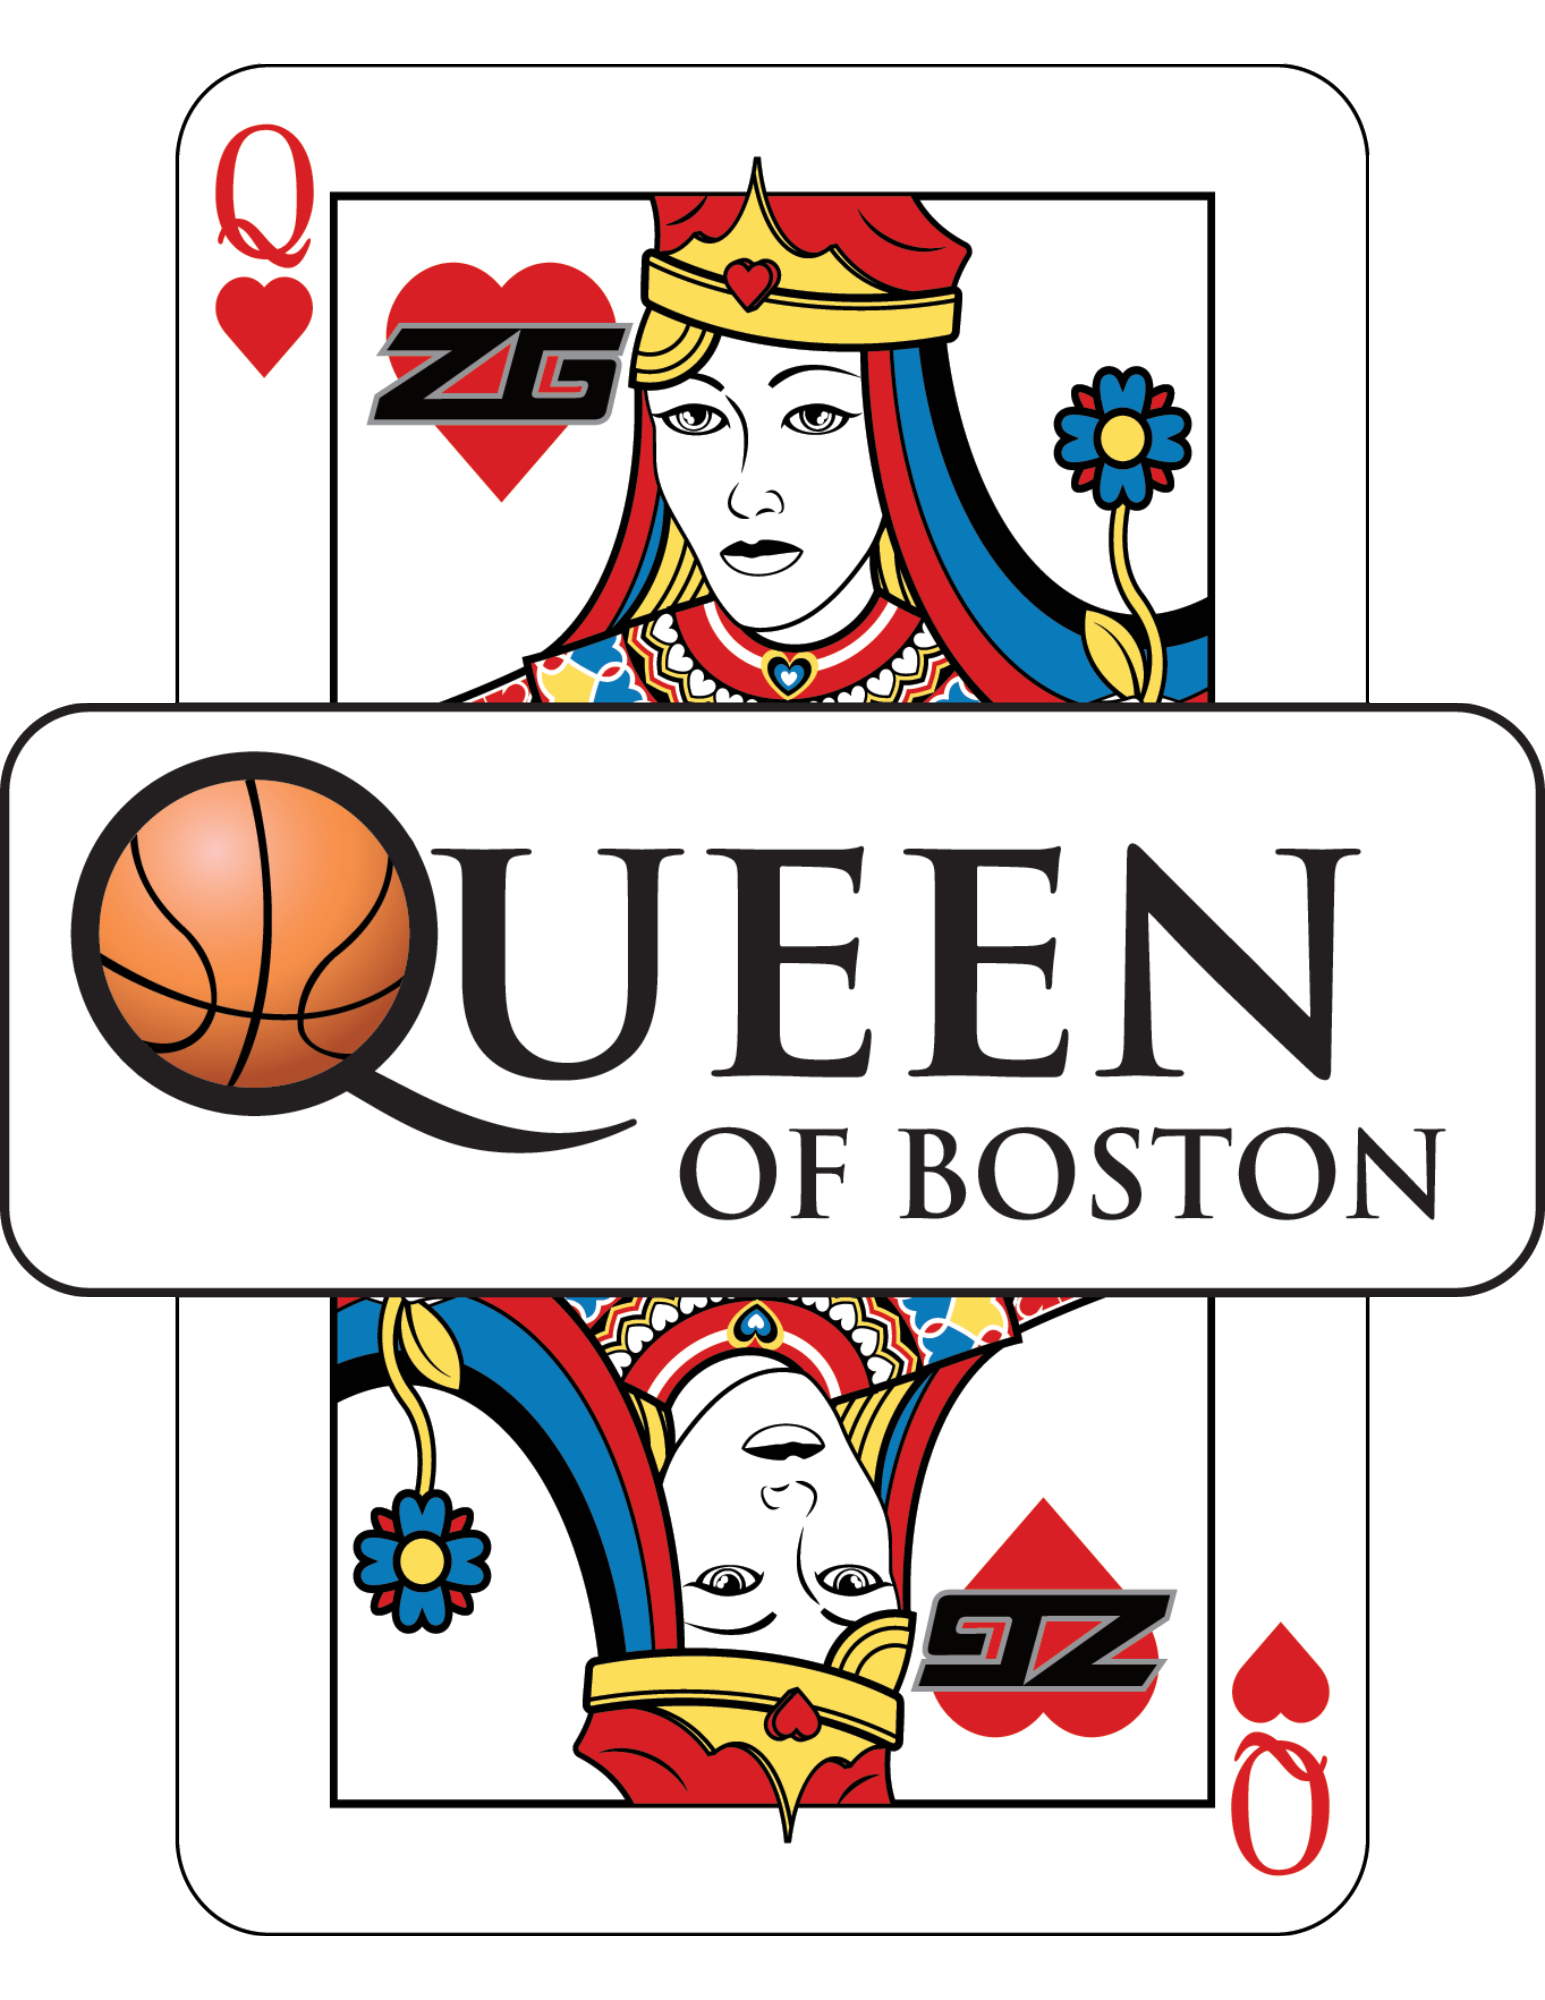 Committed - Queen of Boston